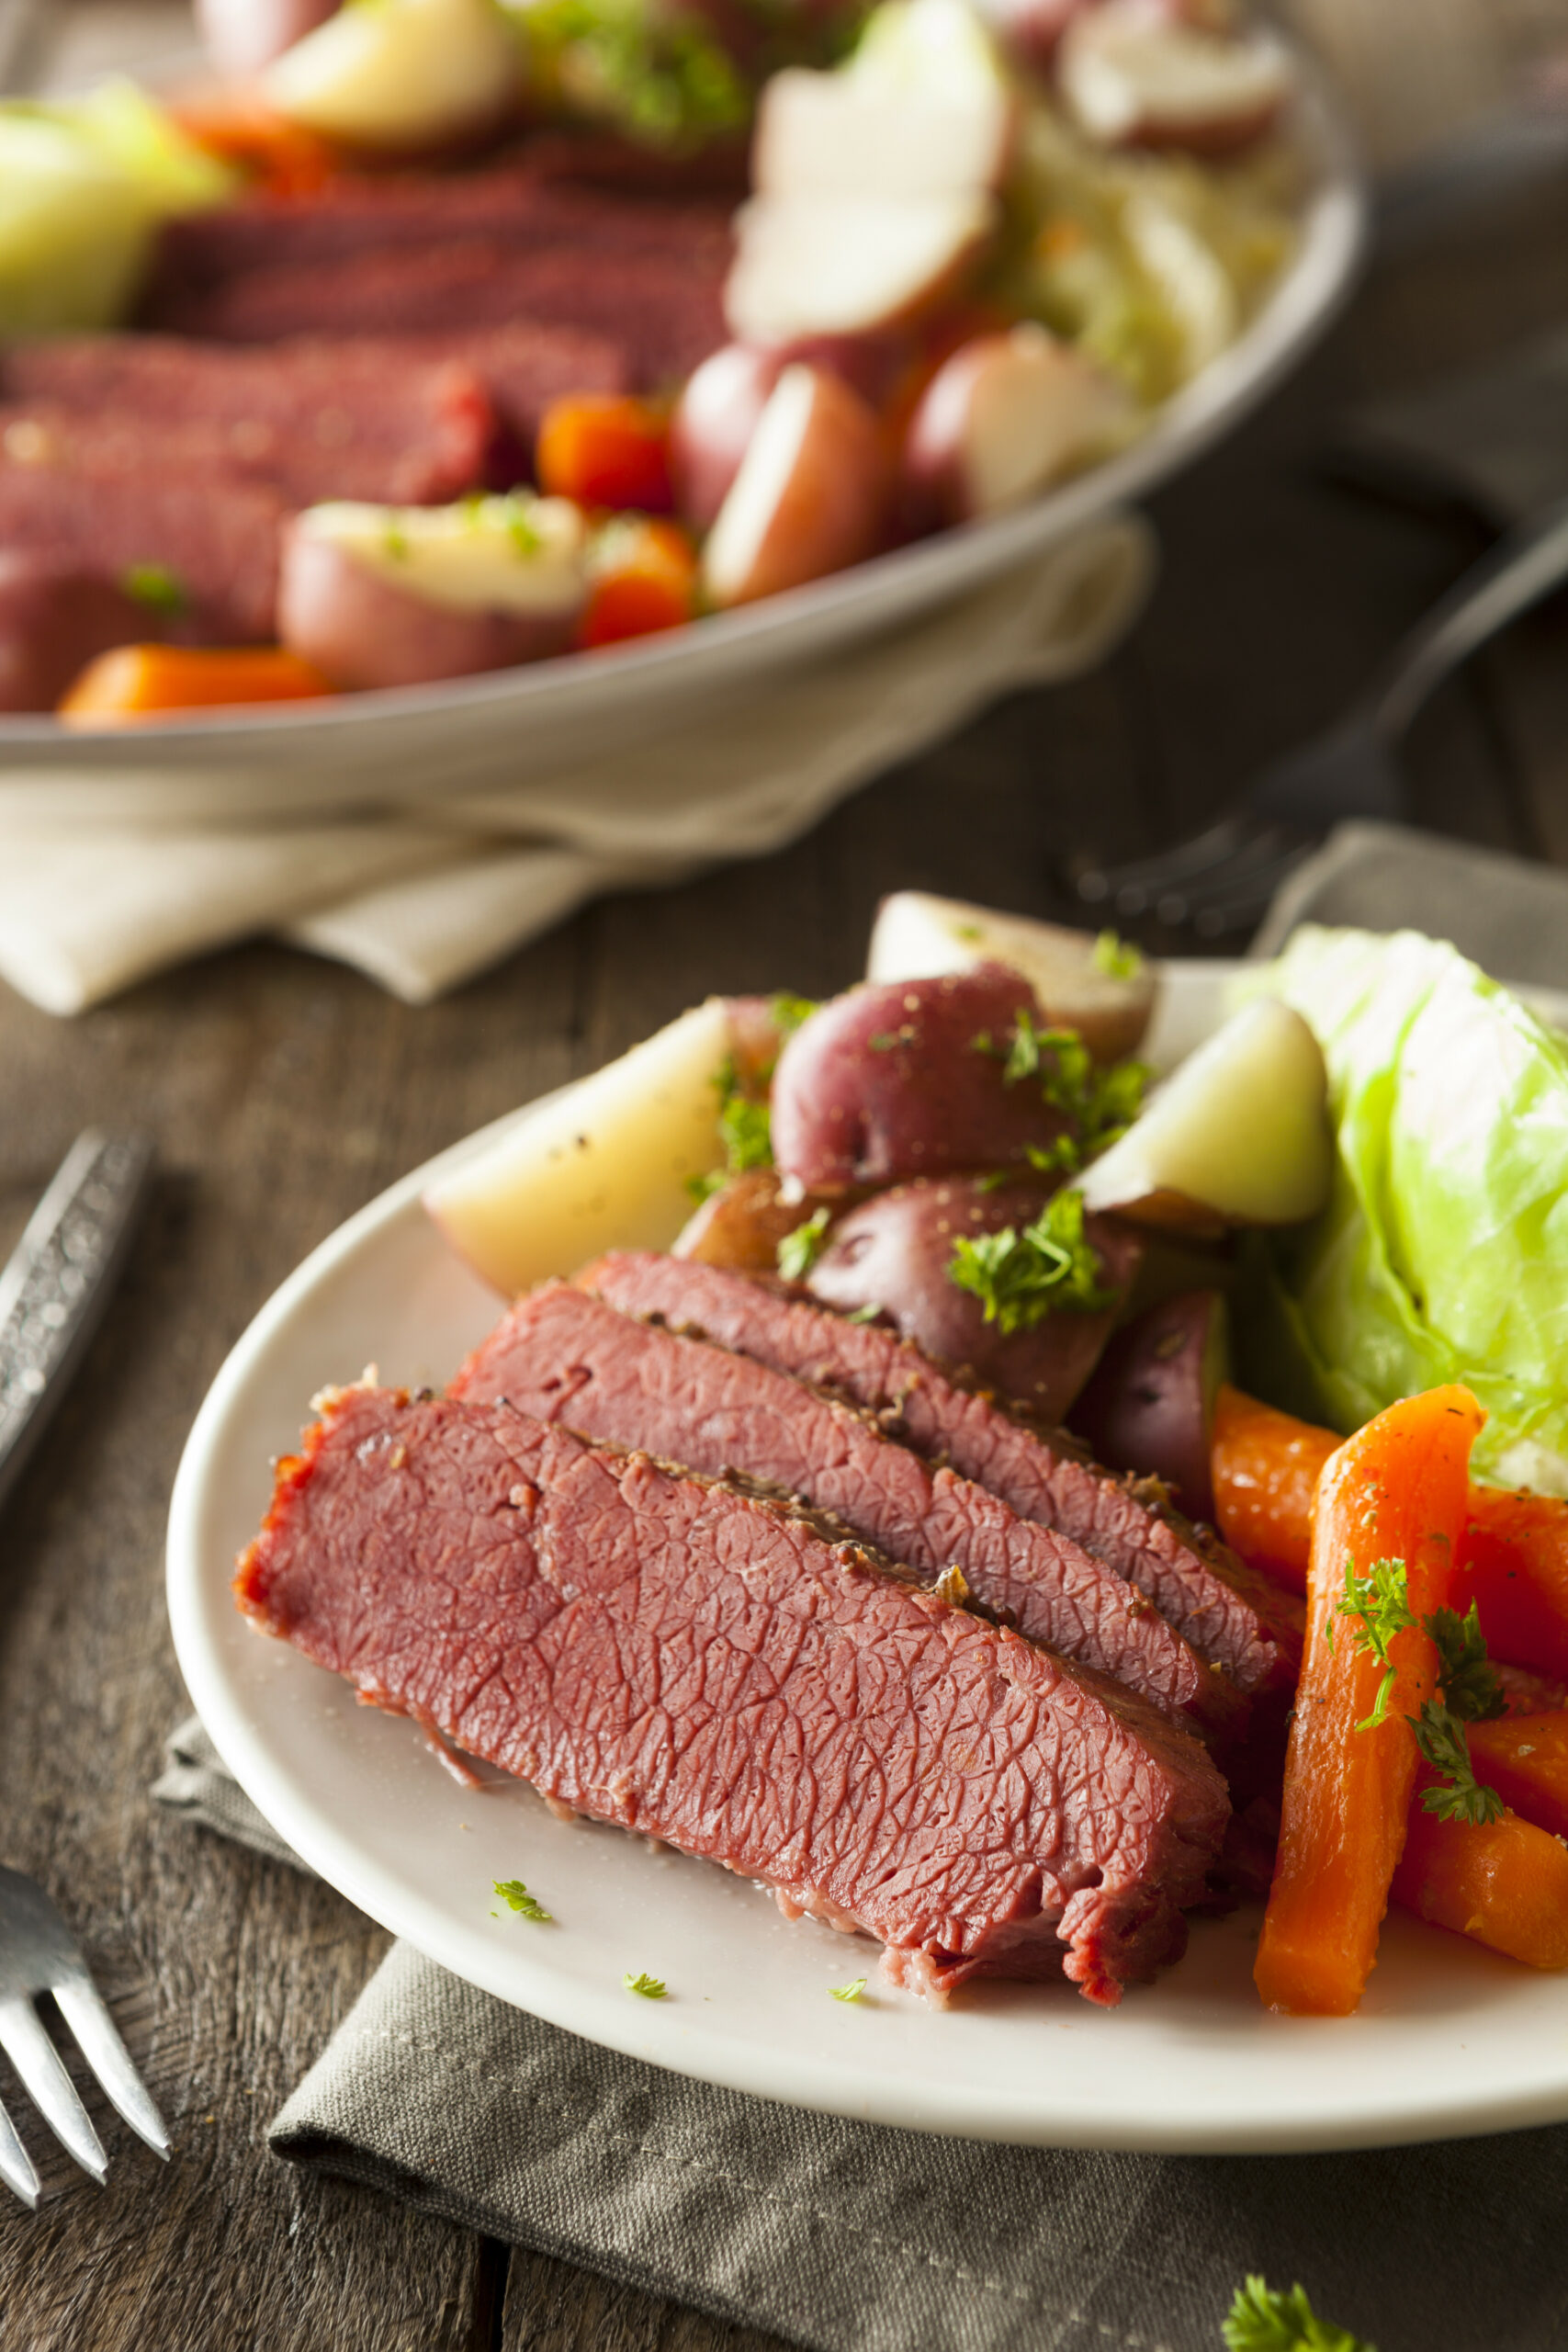 Where To Buy Corned Beef